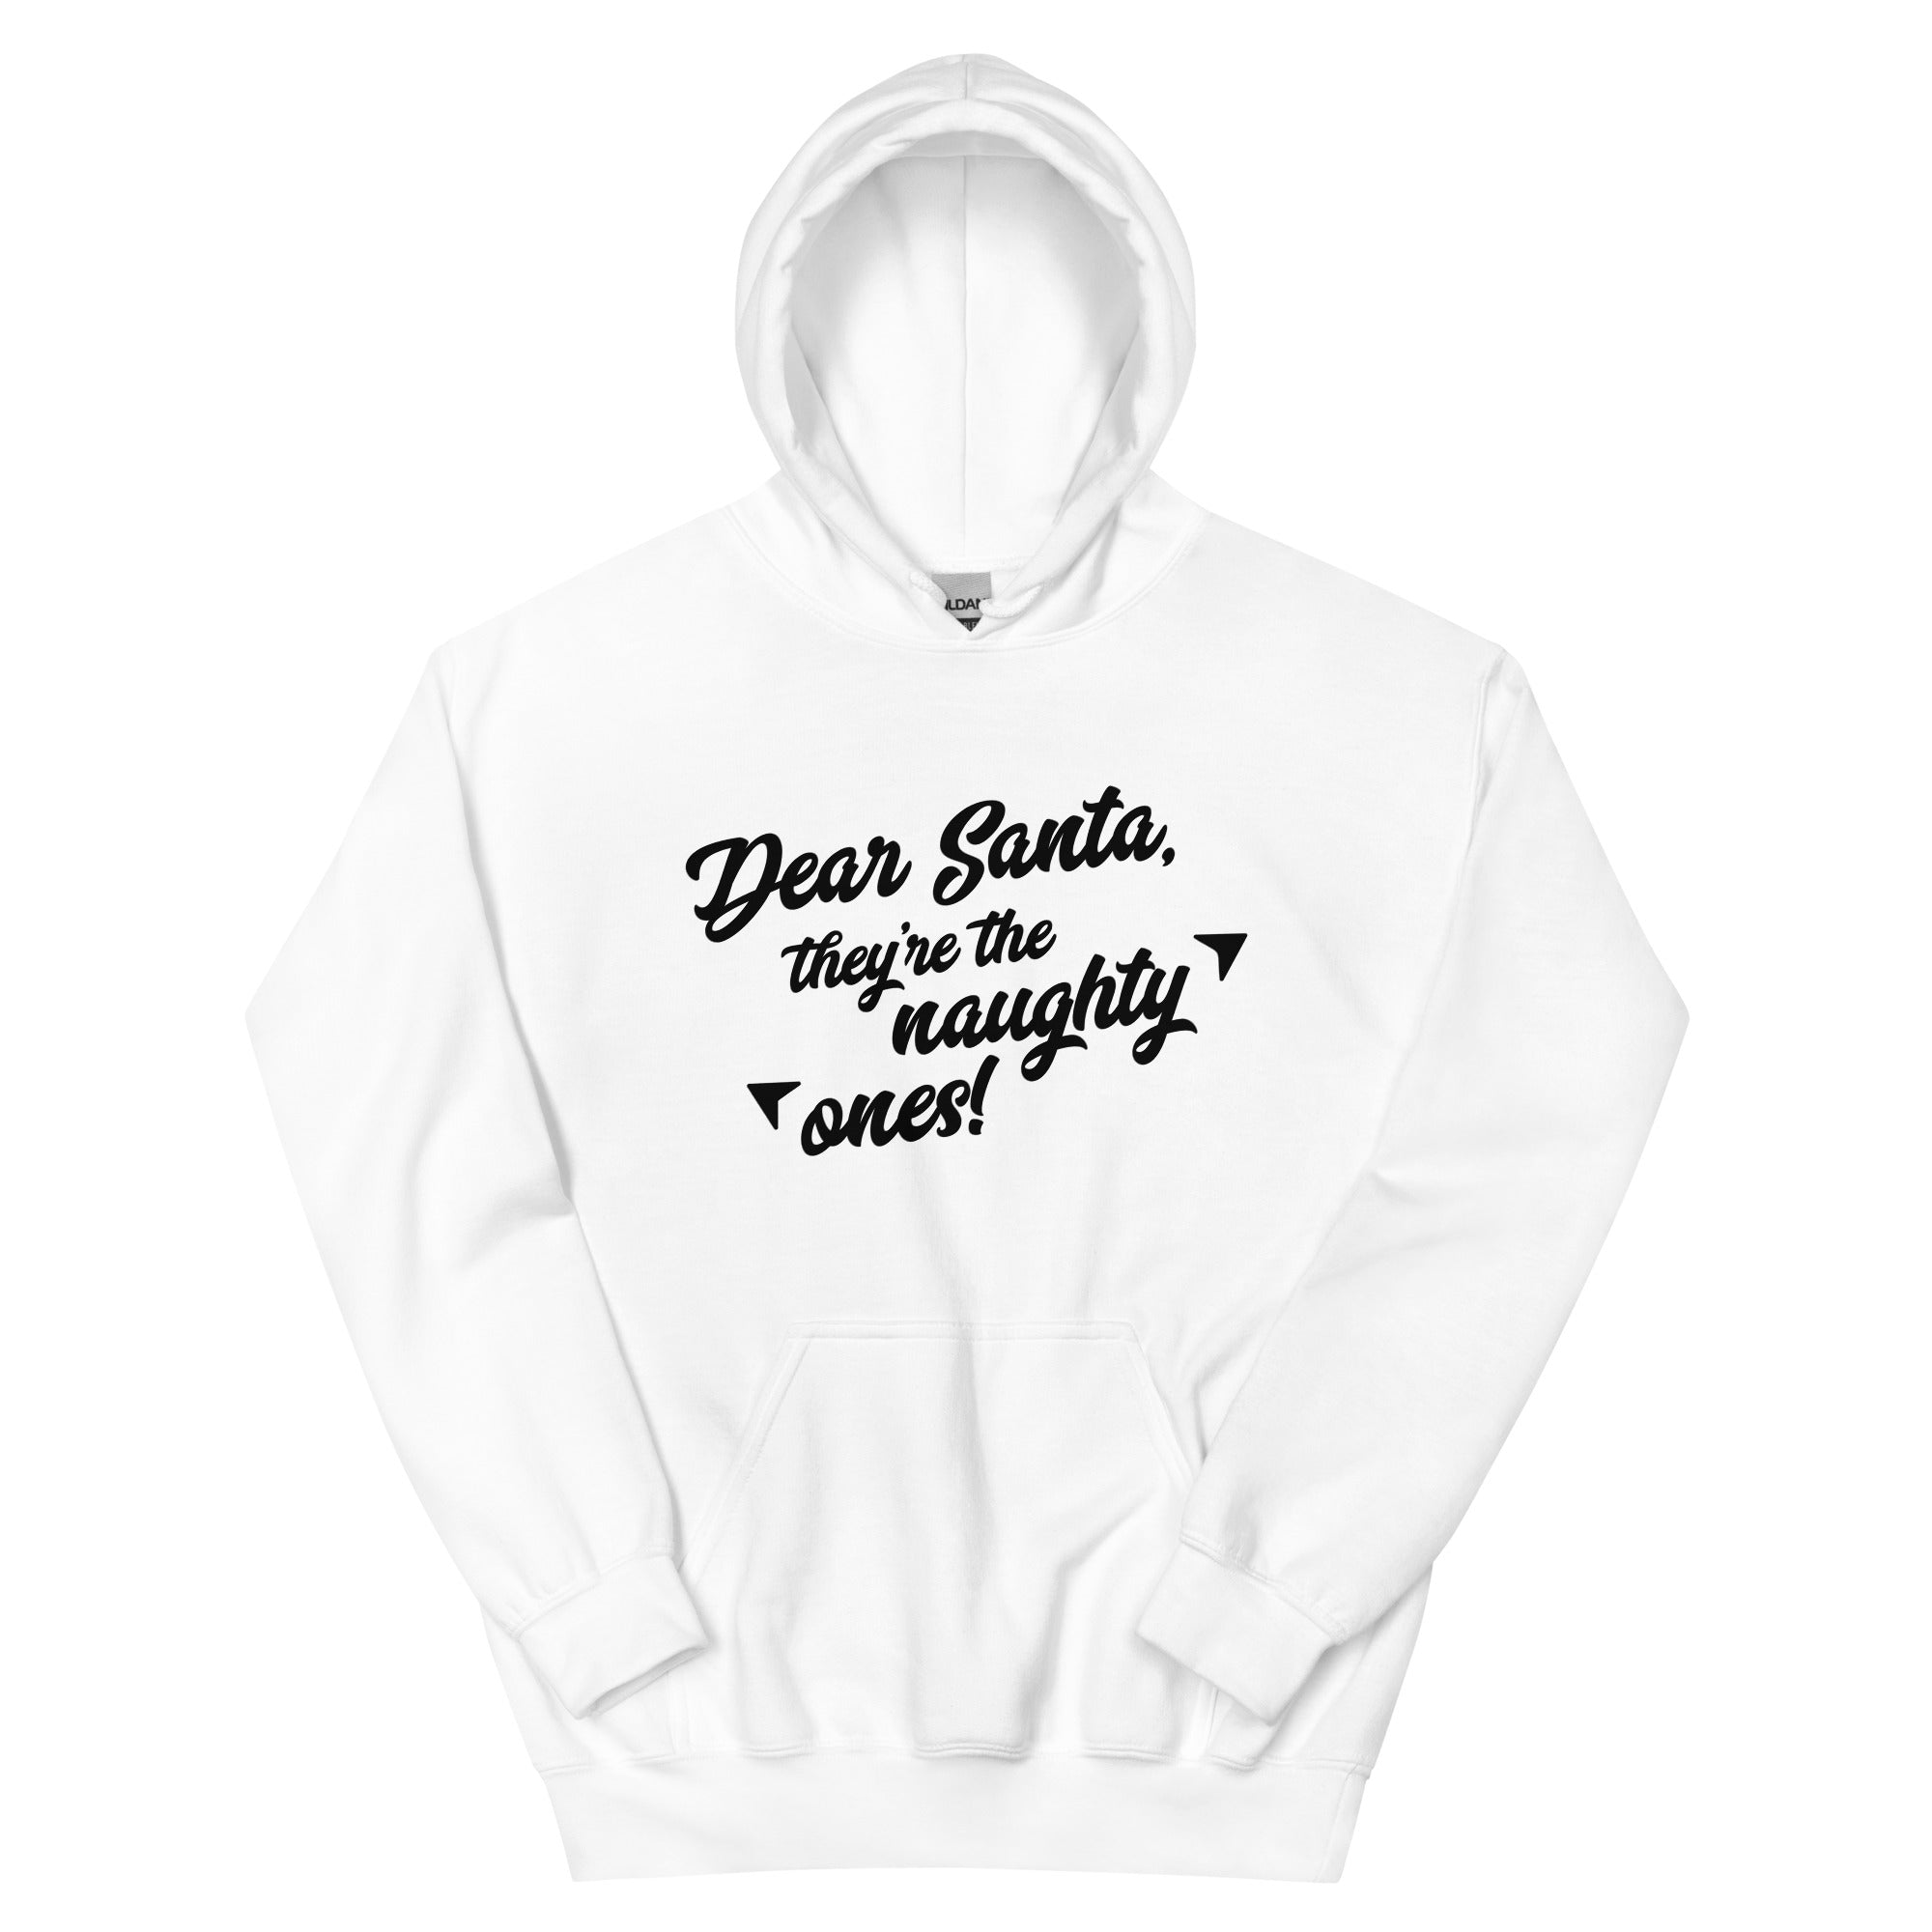 Dear Santa They're The Naughty Ones - Unisex Hoodie